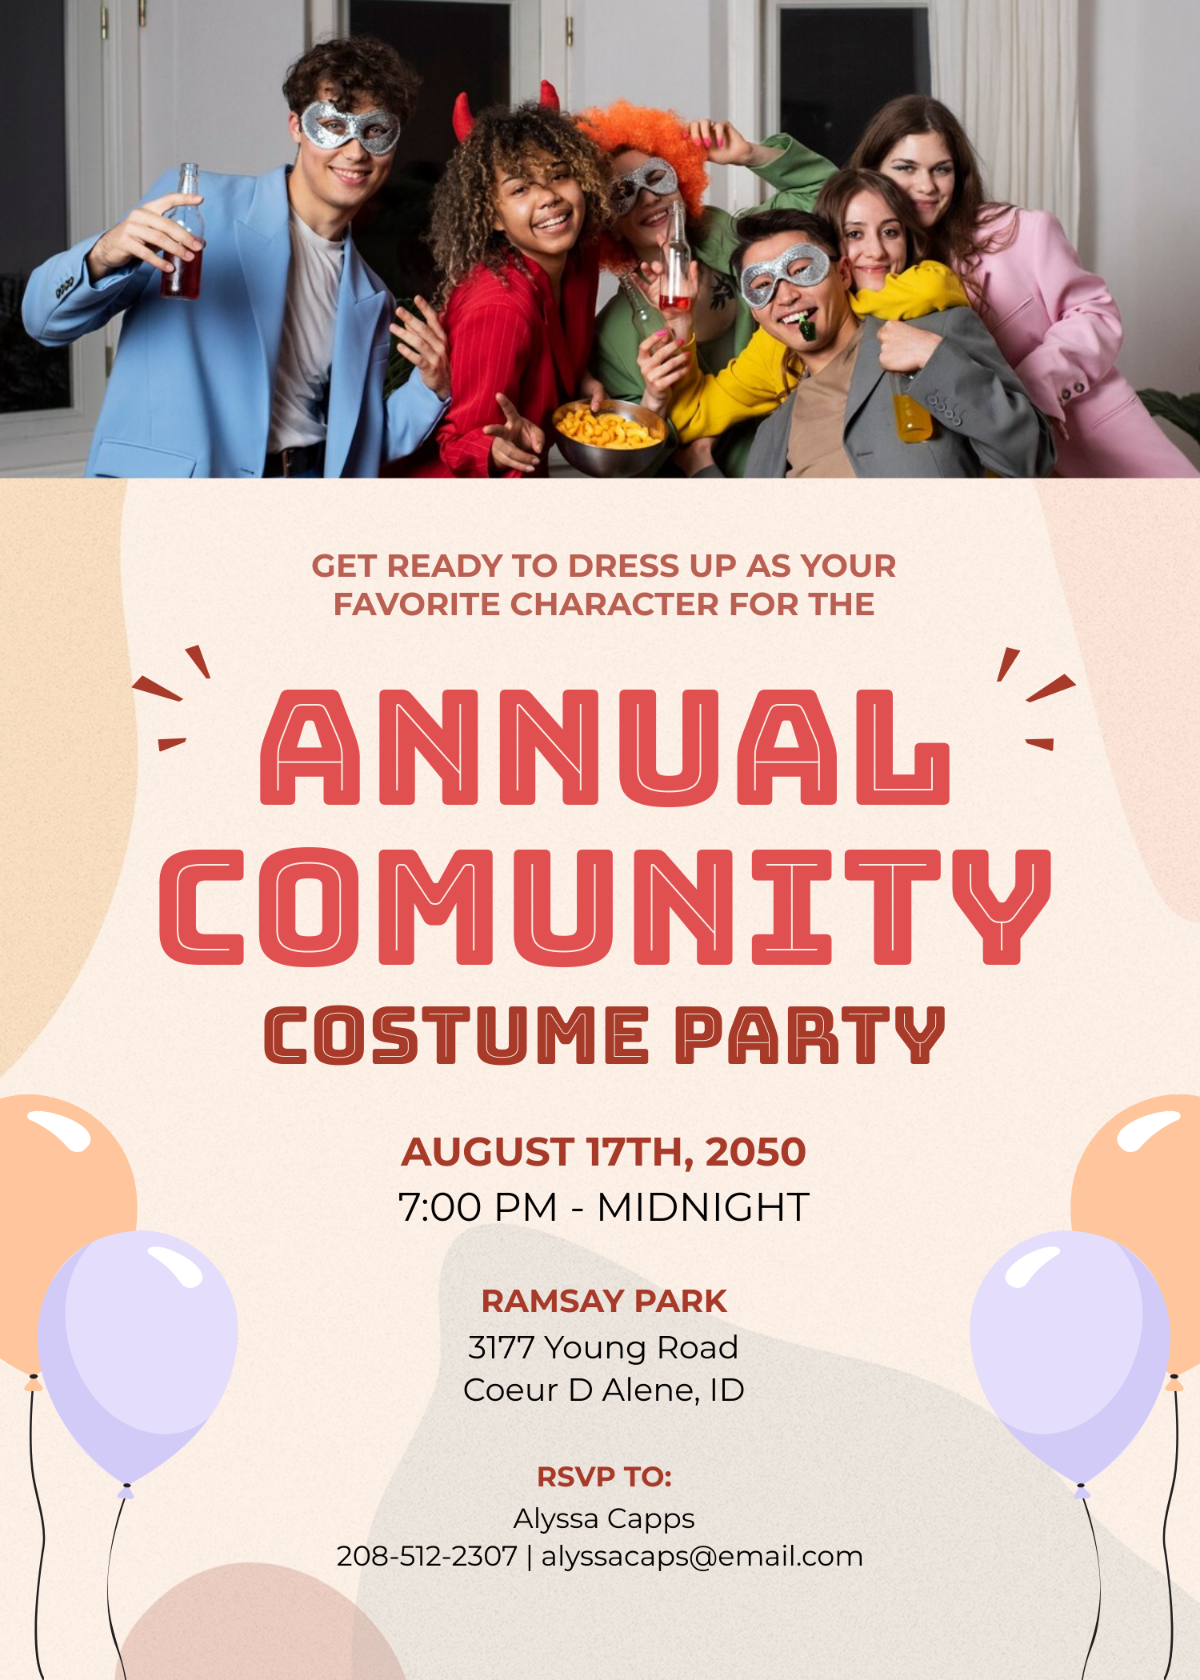 Costume Party Invitation with Photo